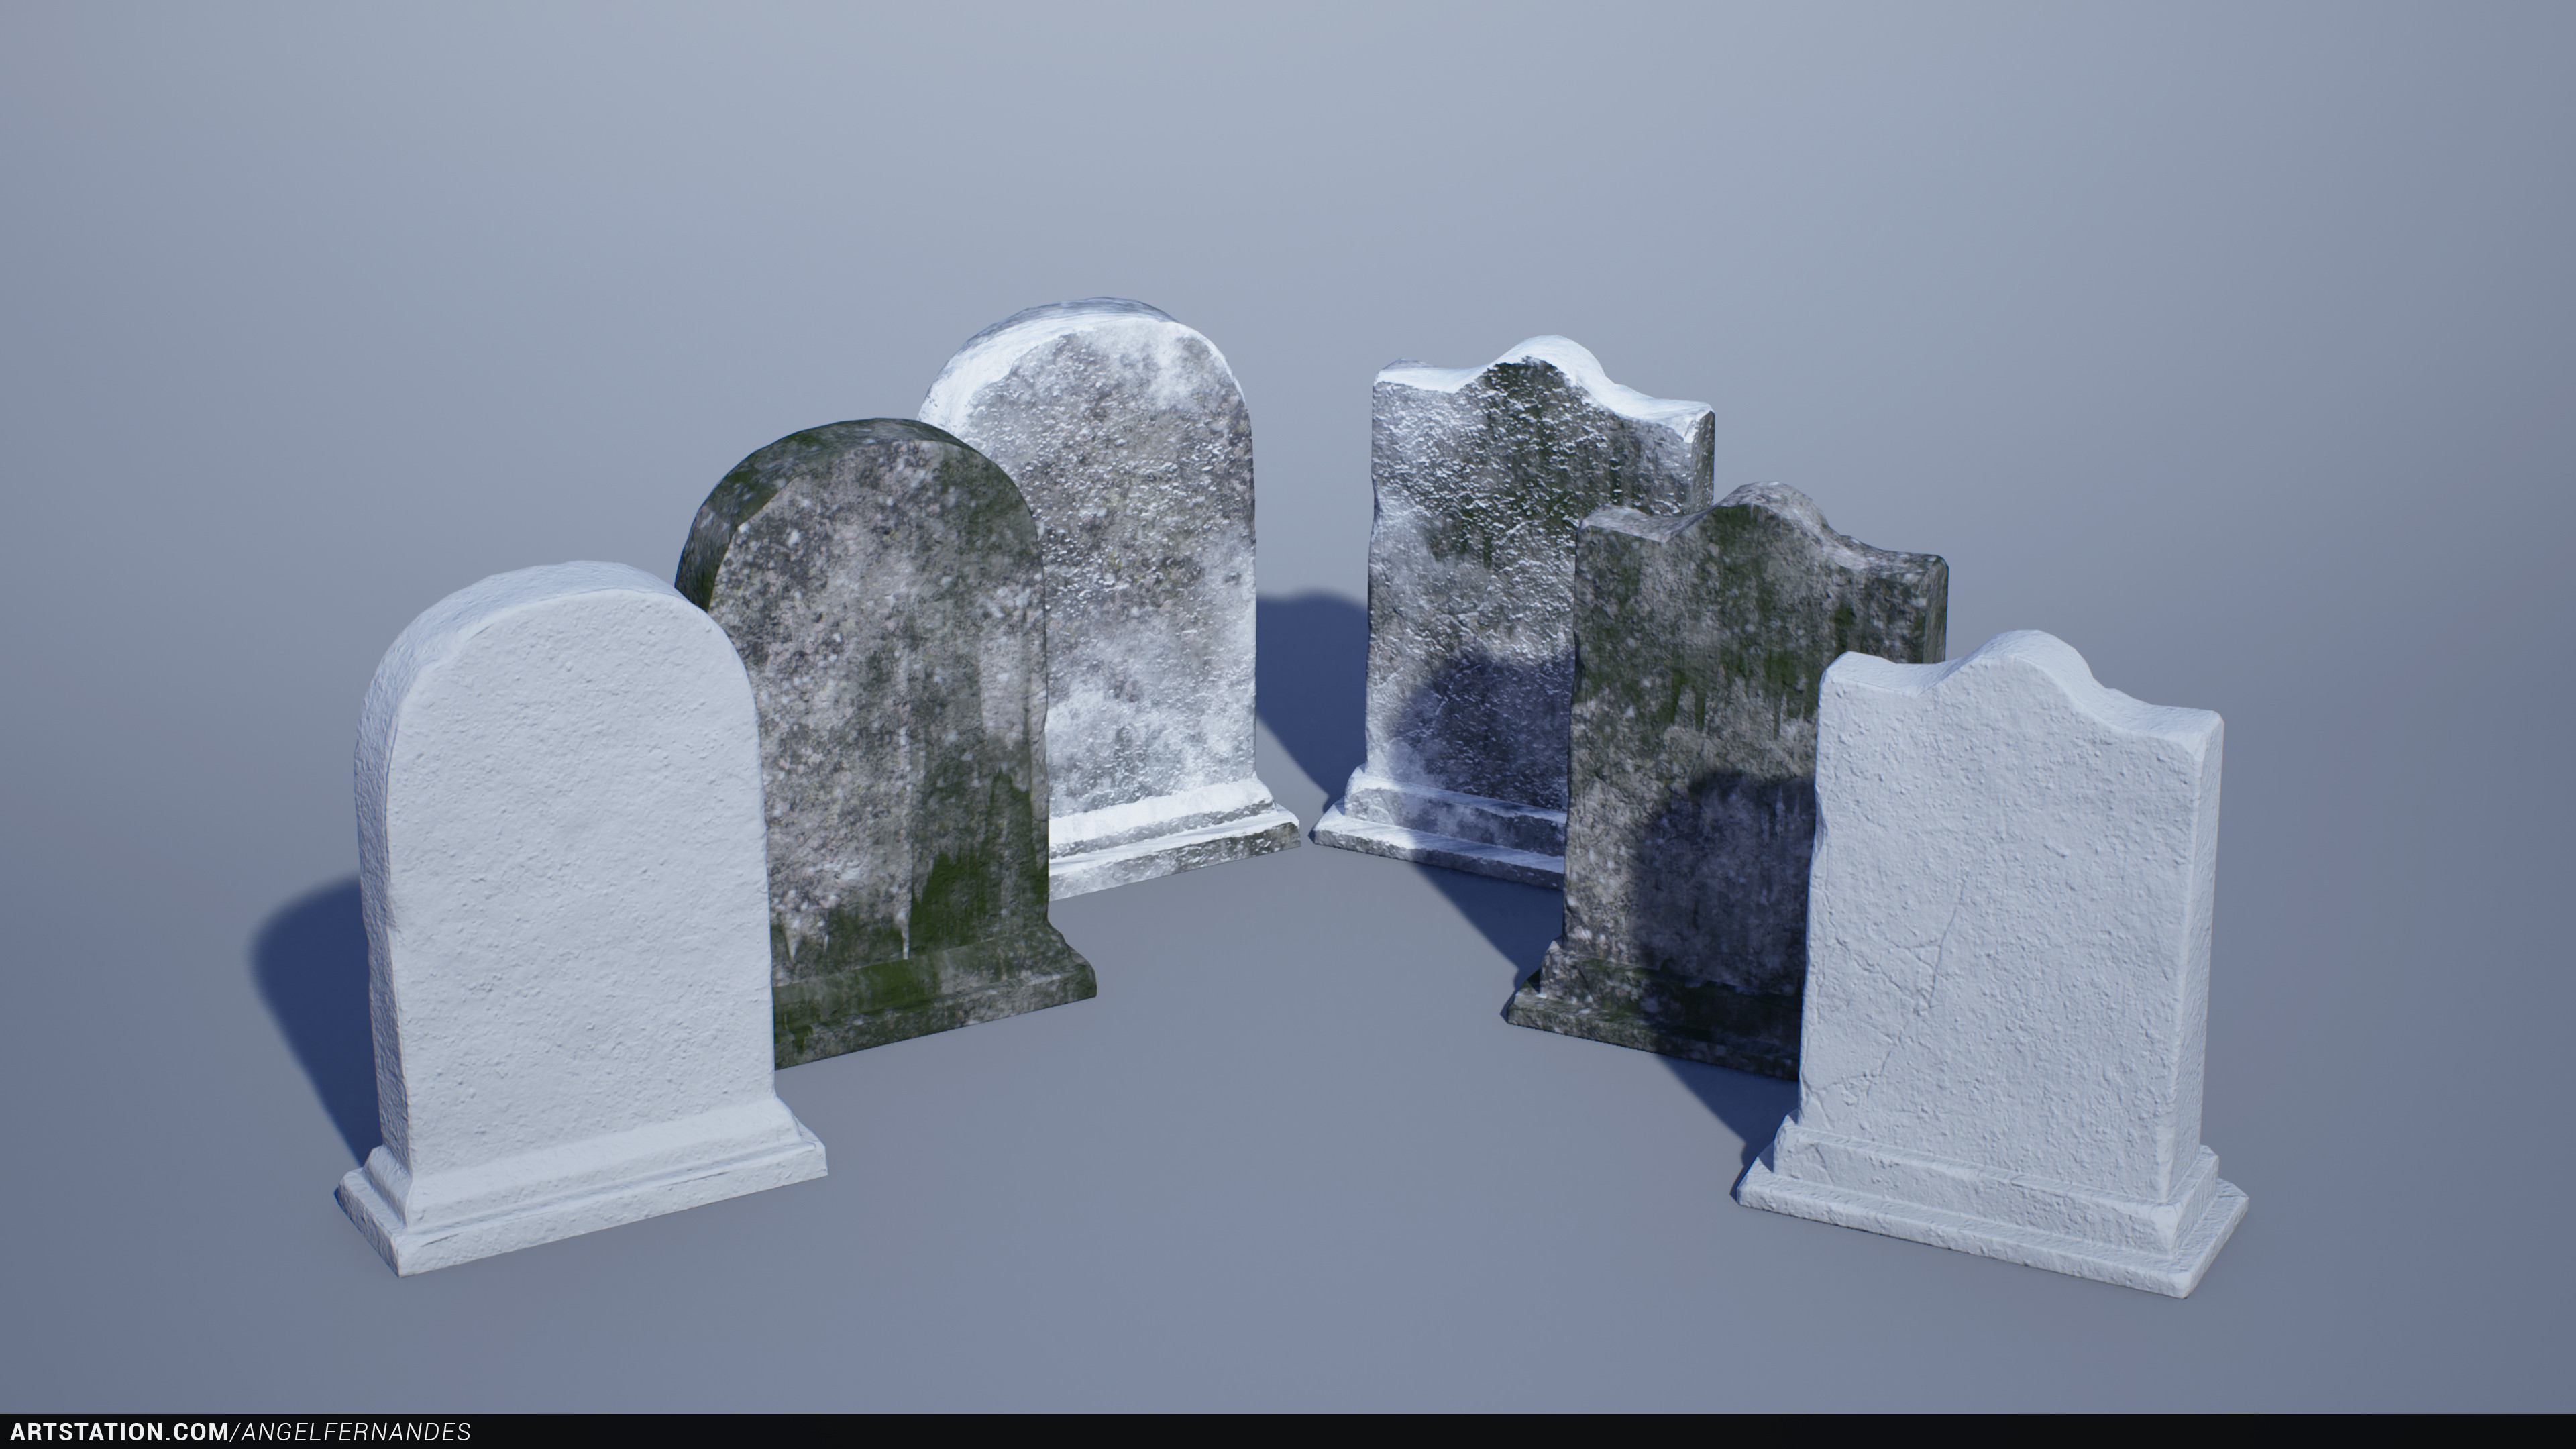 Some basic and noisy tombs. ZBrush, Max and Substance Painter.